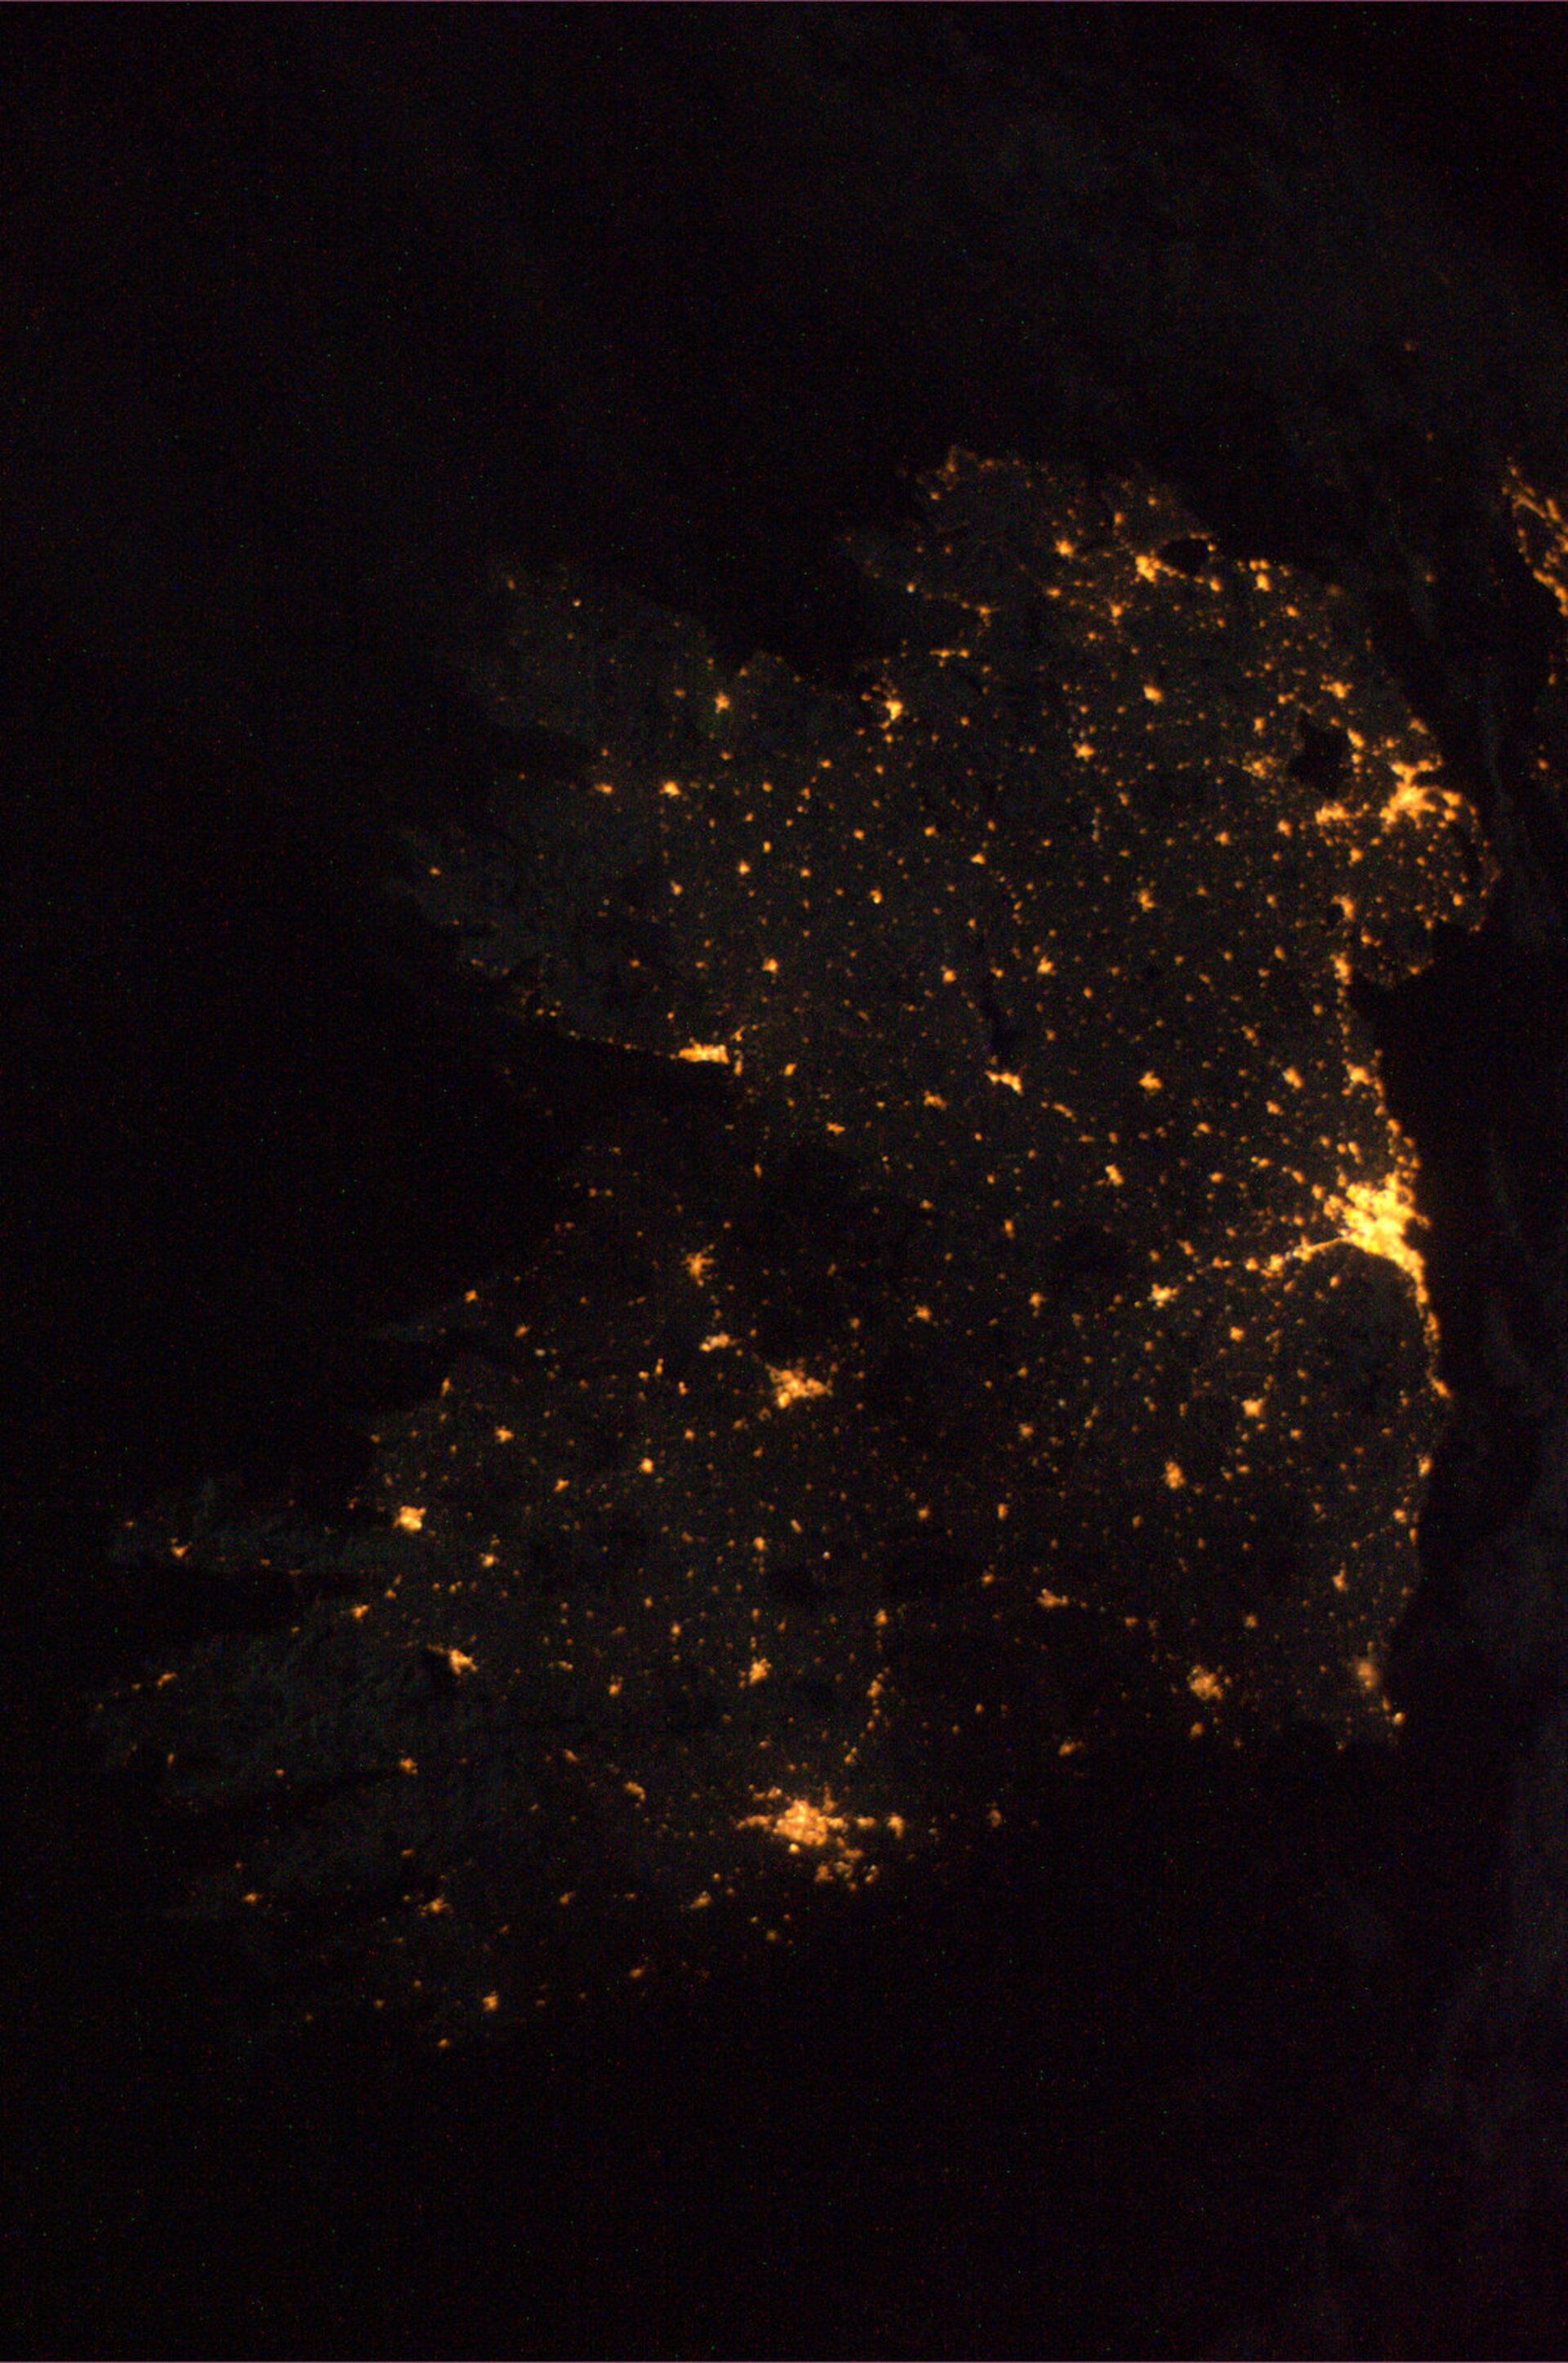 Ireland as seen from ISS